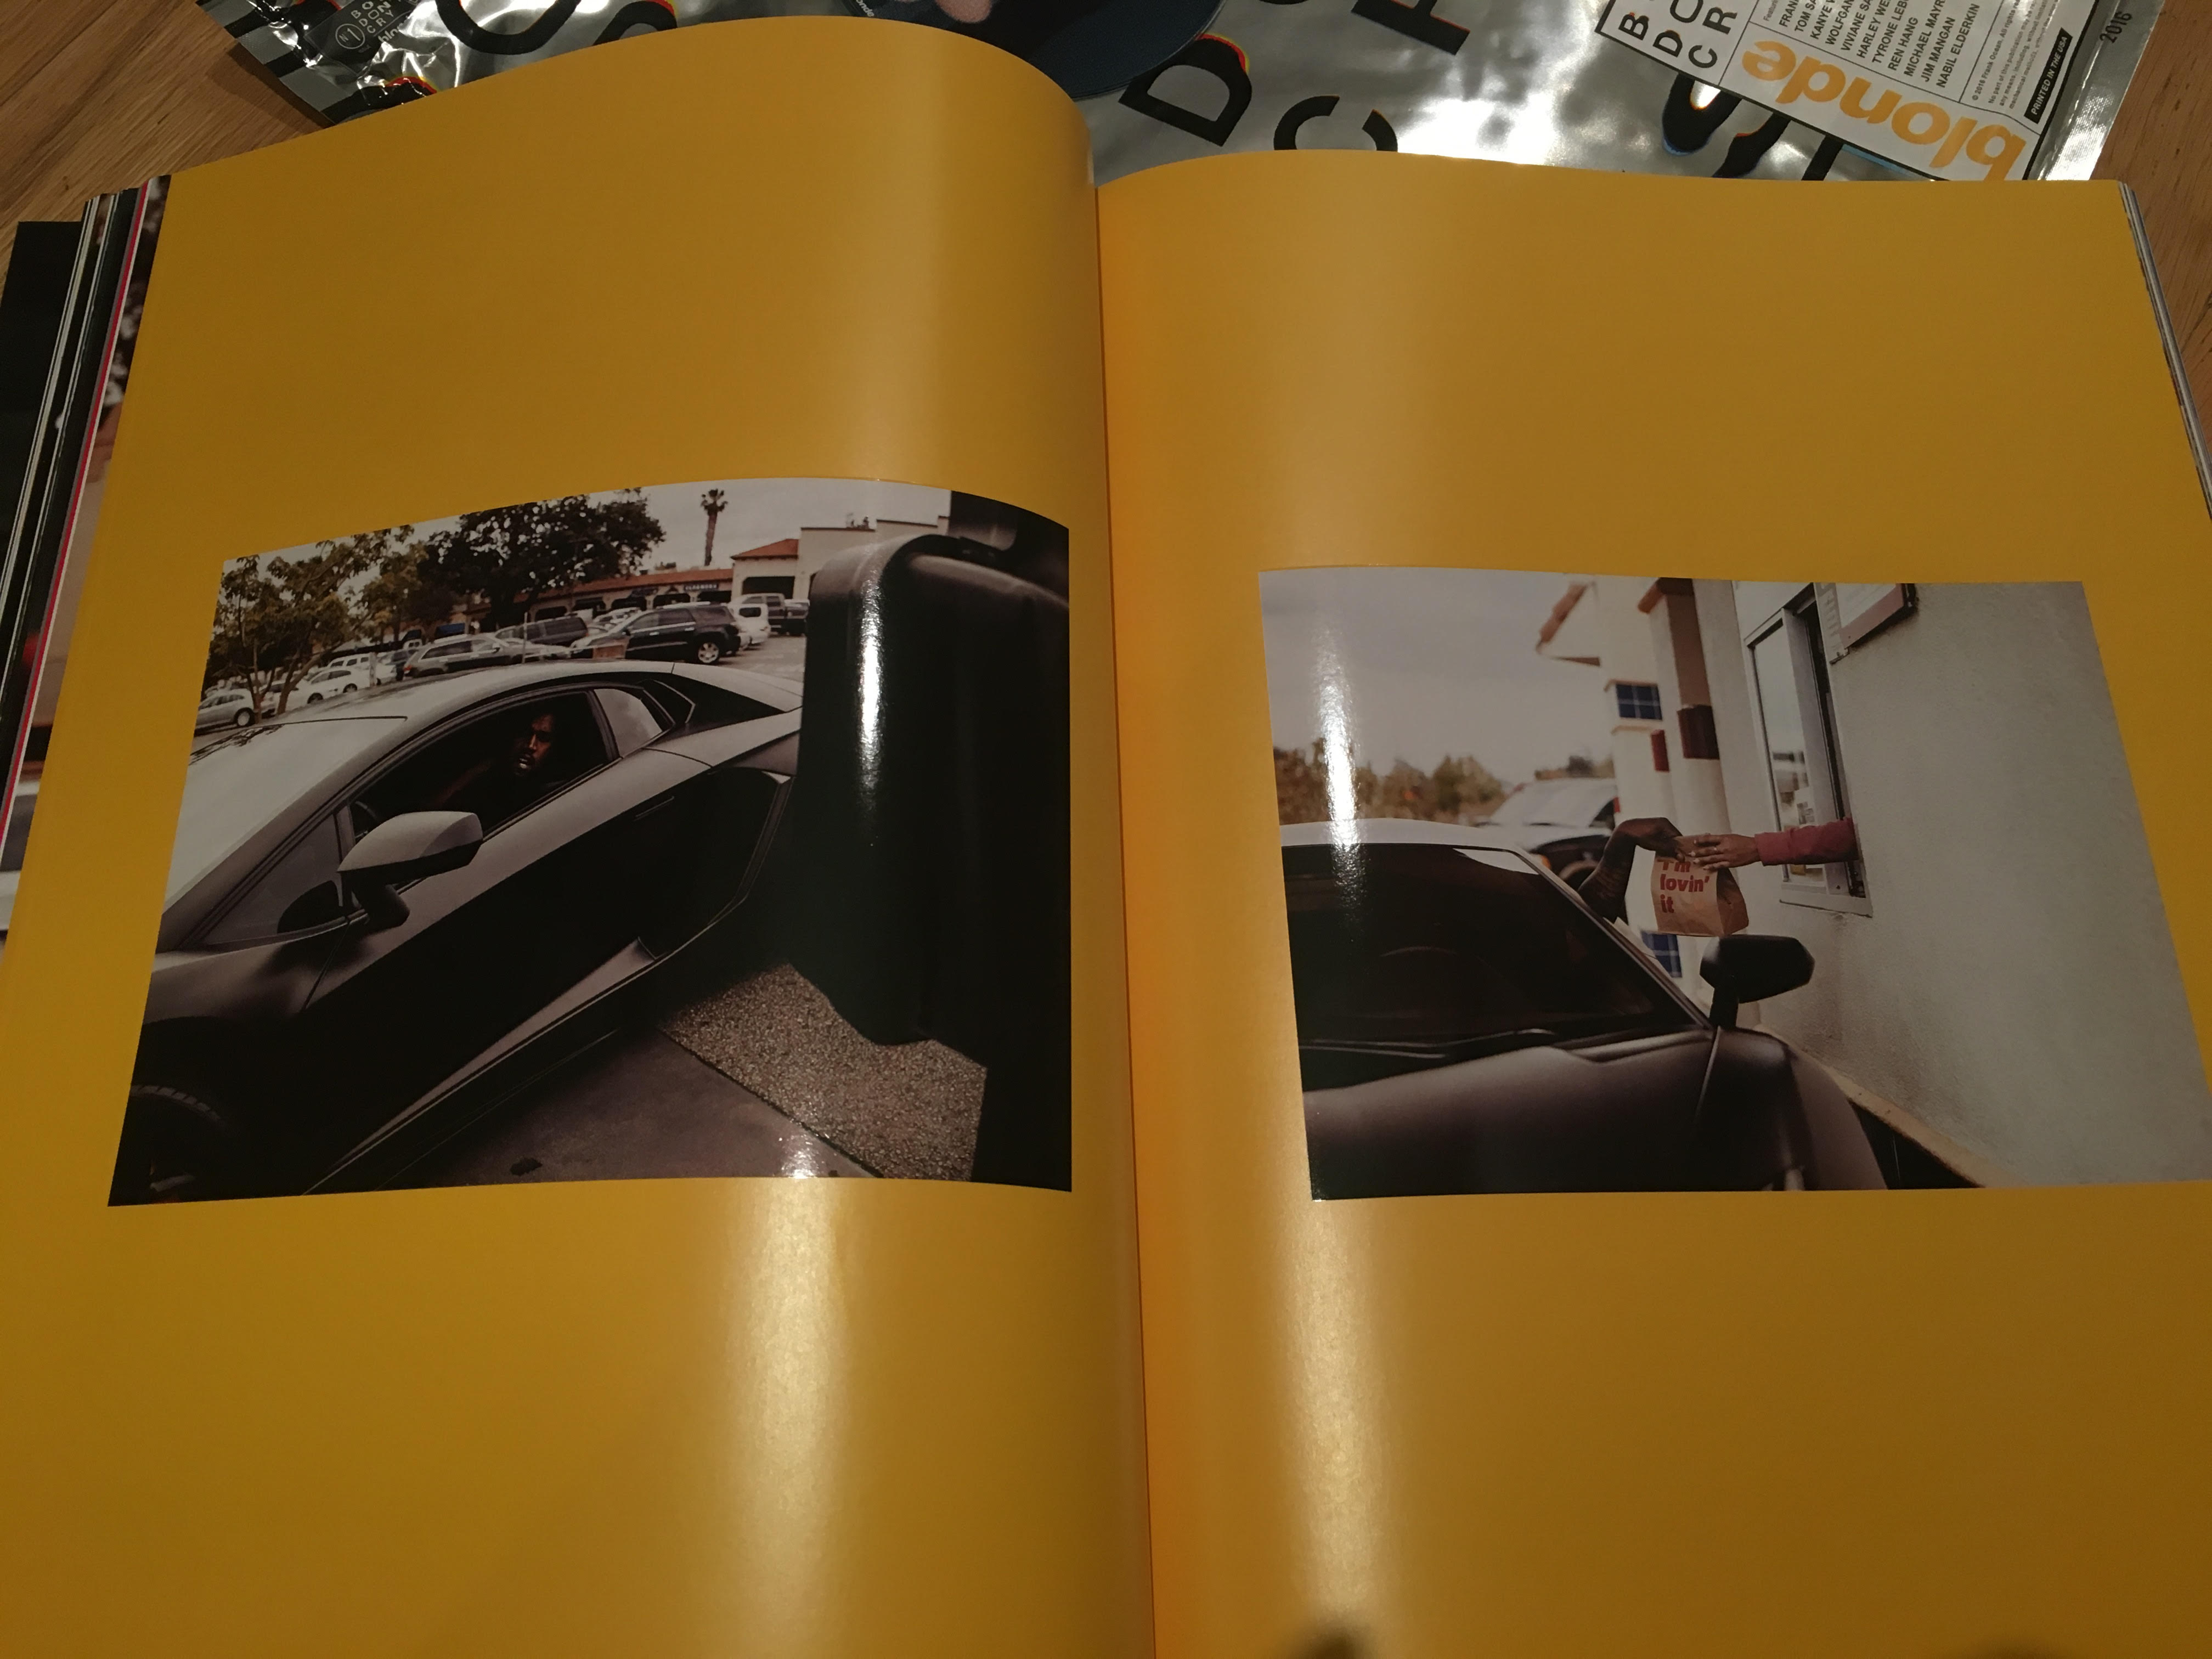 Here's a Look Inside Frank Ocean's 'Boys Don't Cry' Zine | Complex